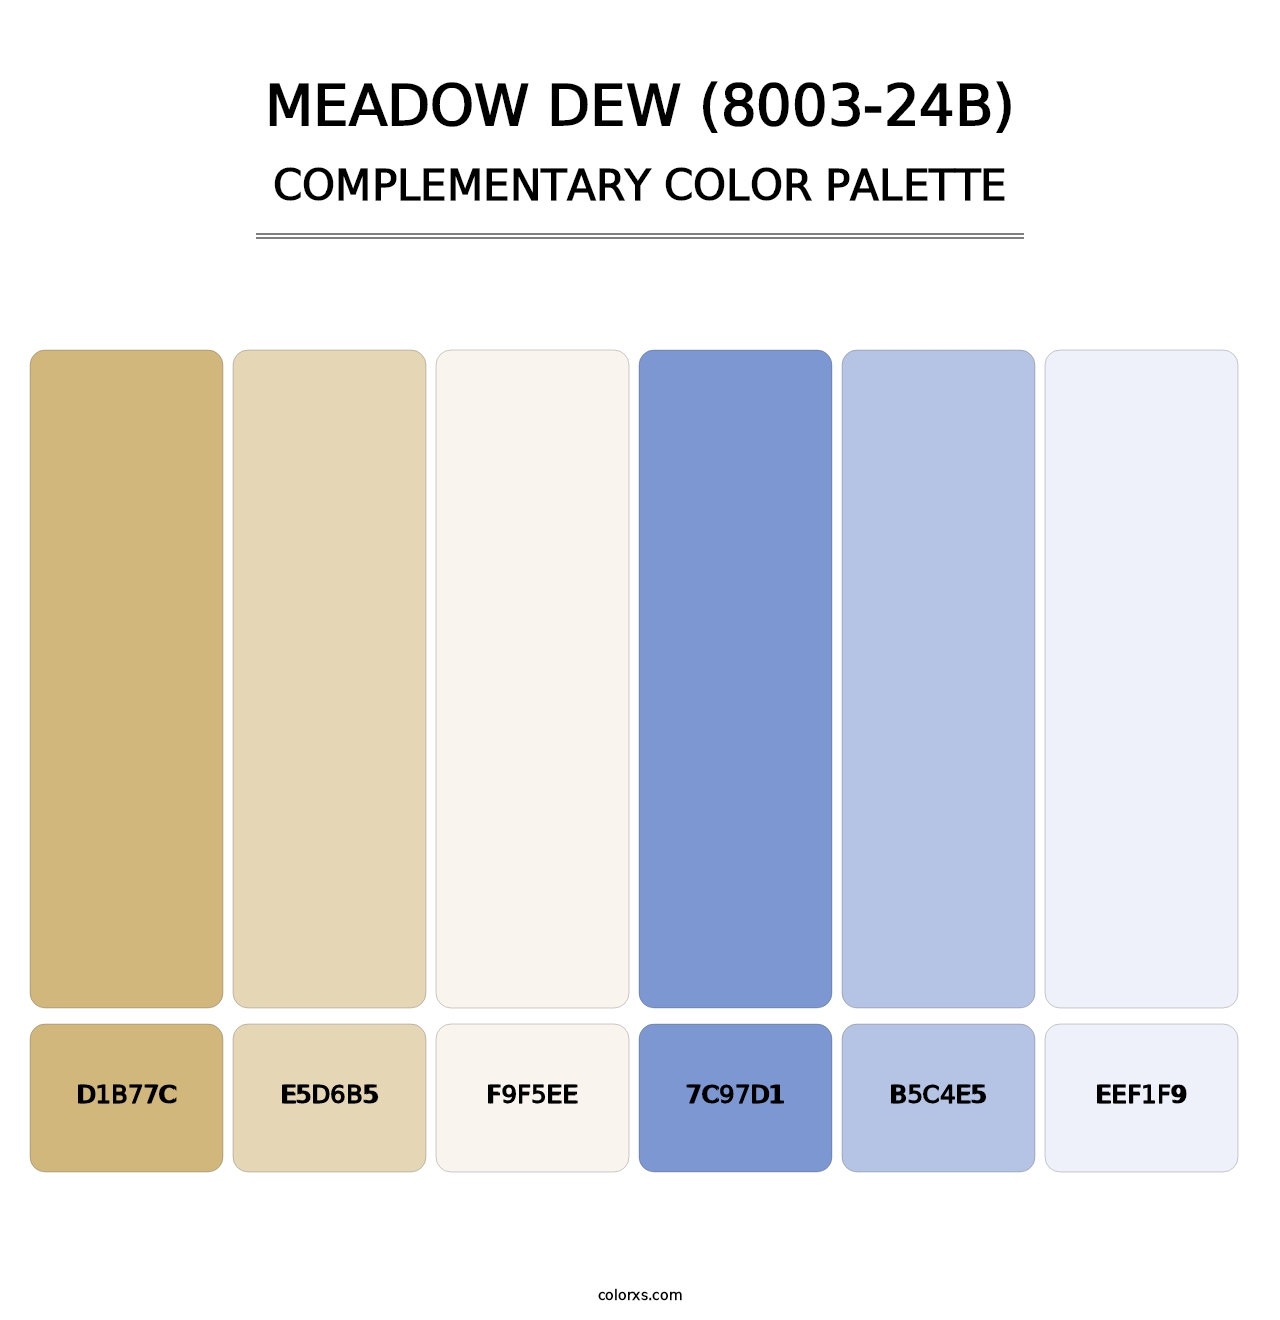 Meadow Dew (8003-24B) - Complementary Color Palette